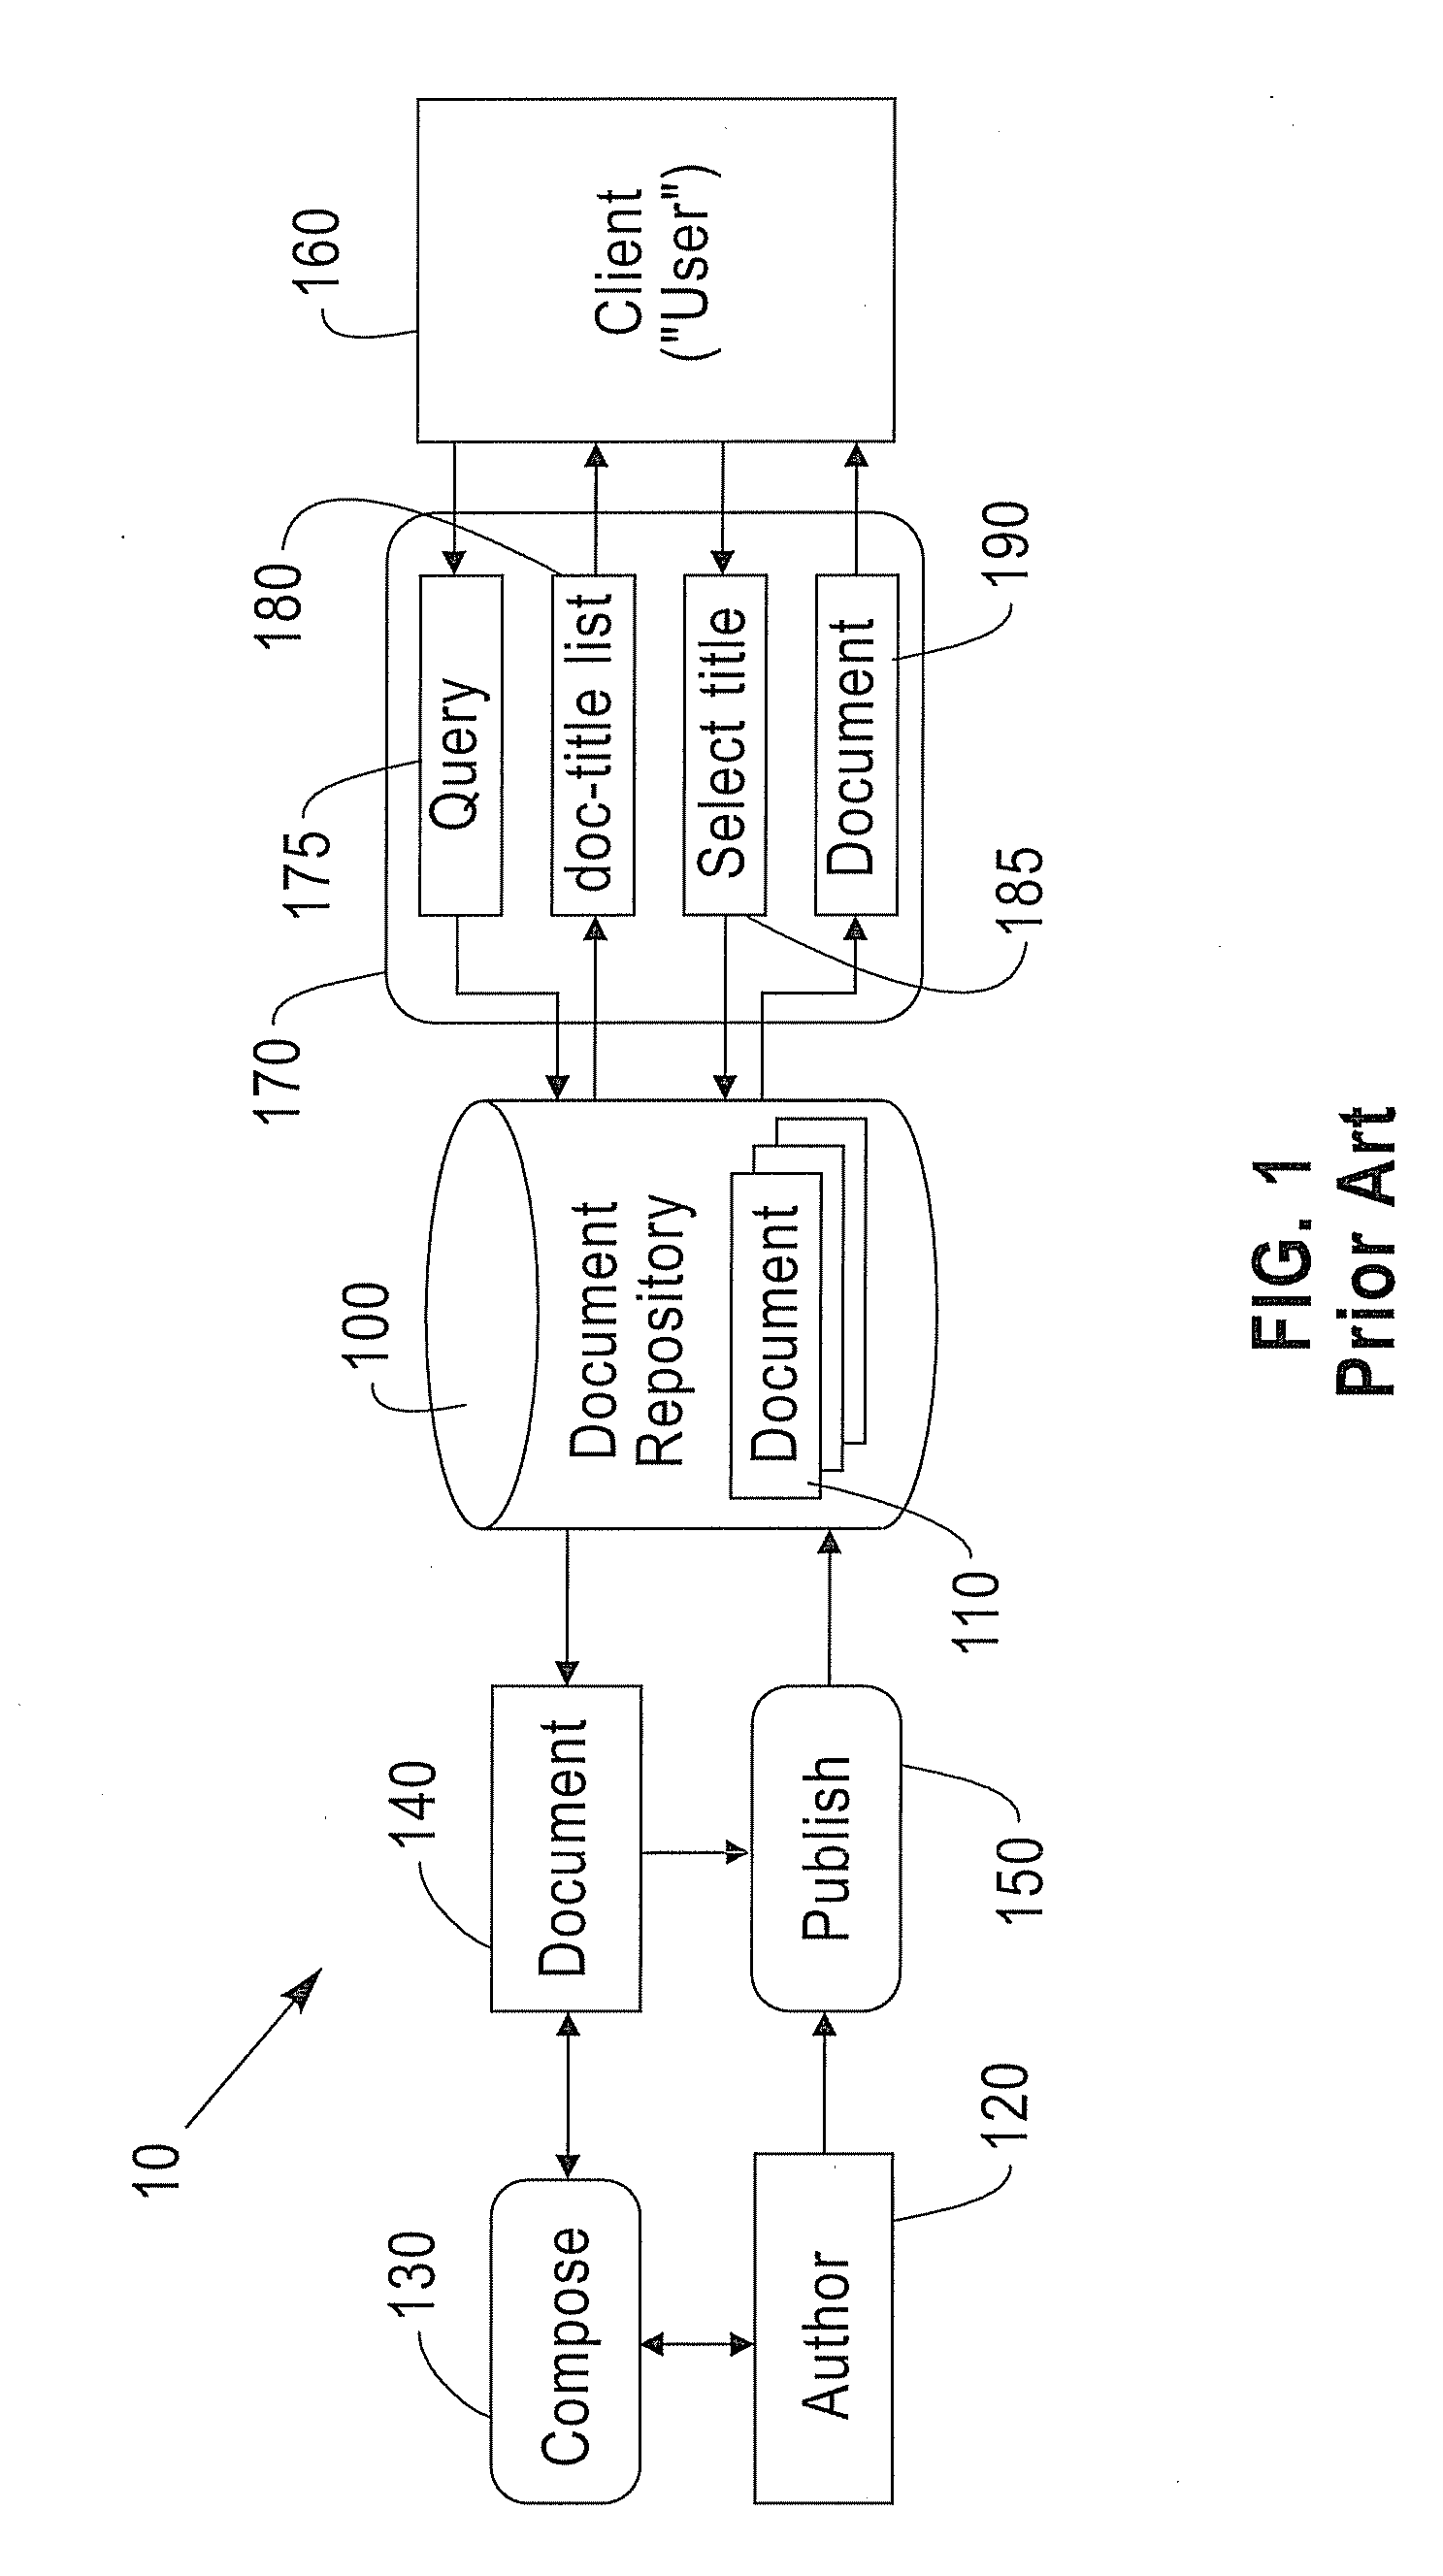 System and method for adding comments to knowledge documents and expediting formal authoring of content